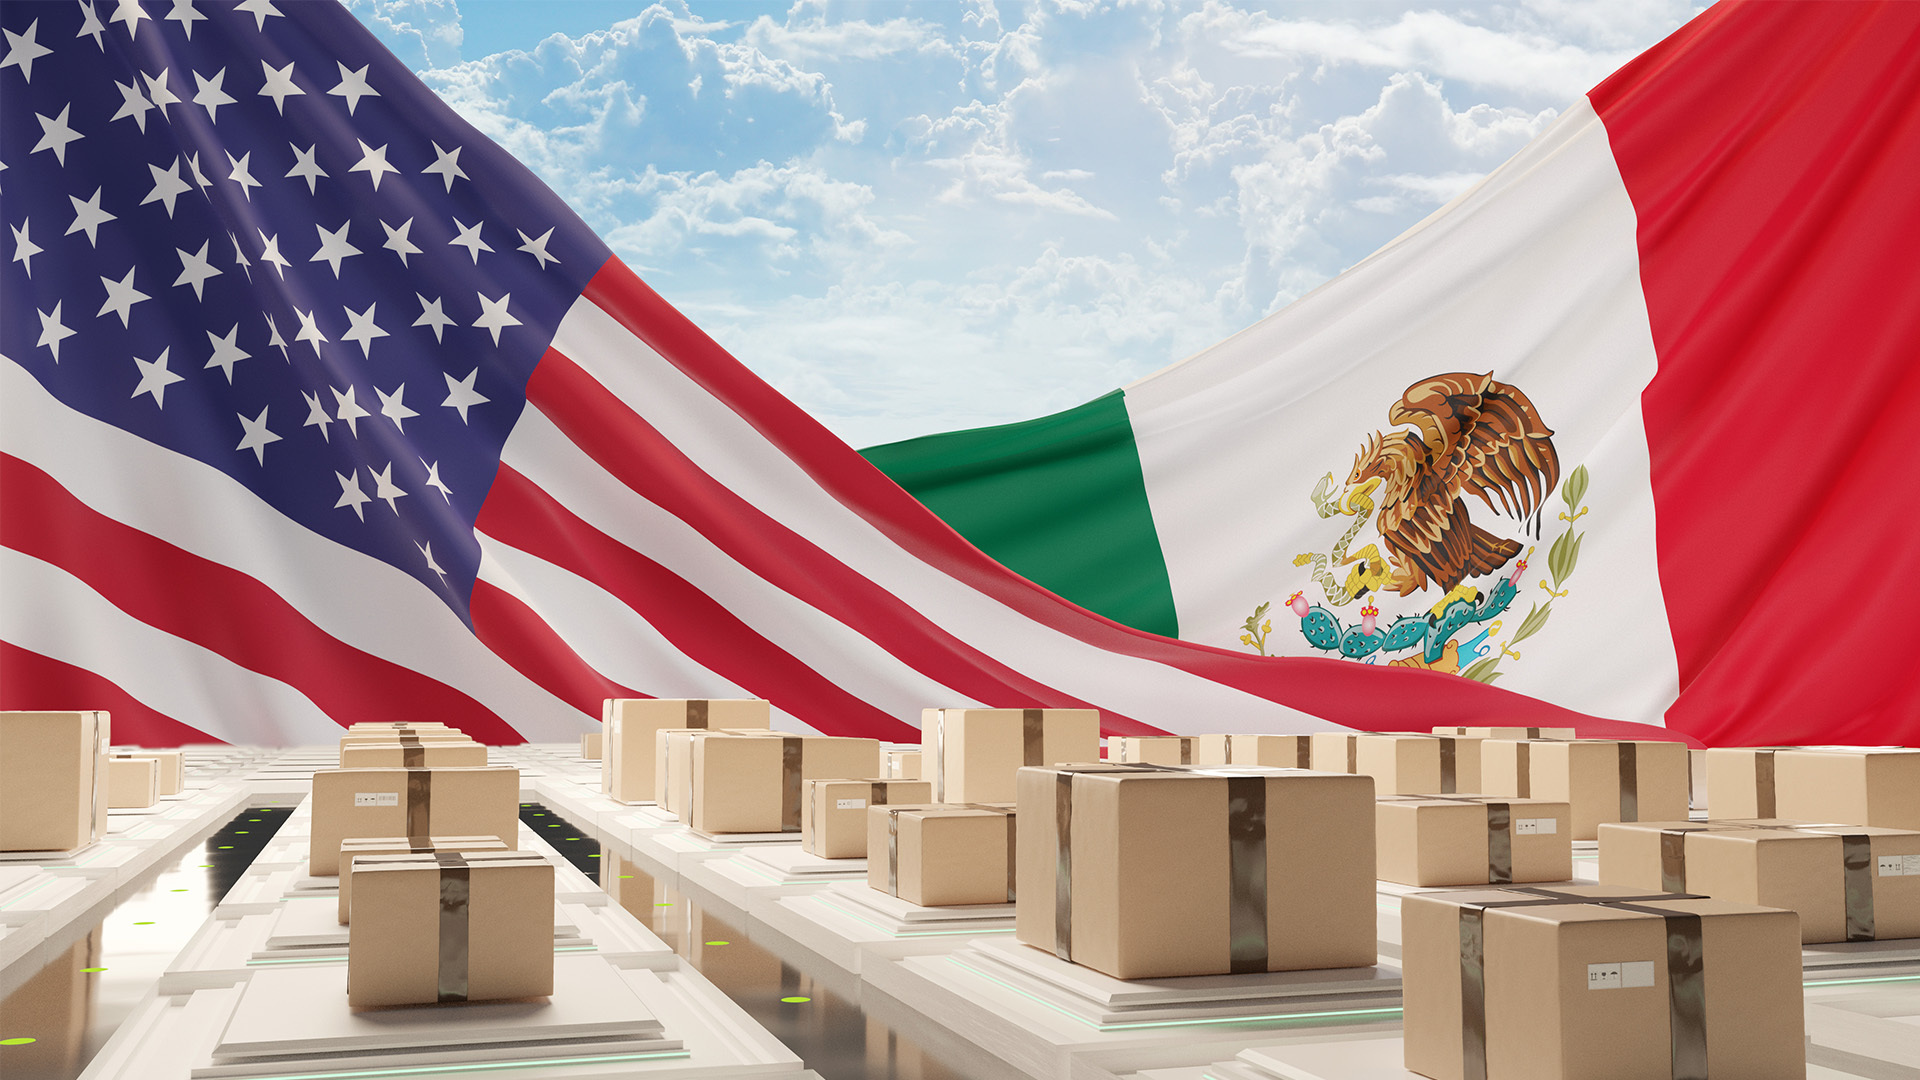 U.S. flag overlap the Mexico flag with Postal Packages under the sky